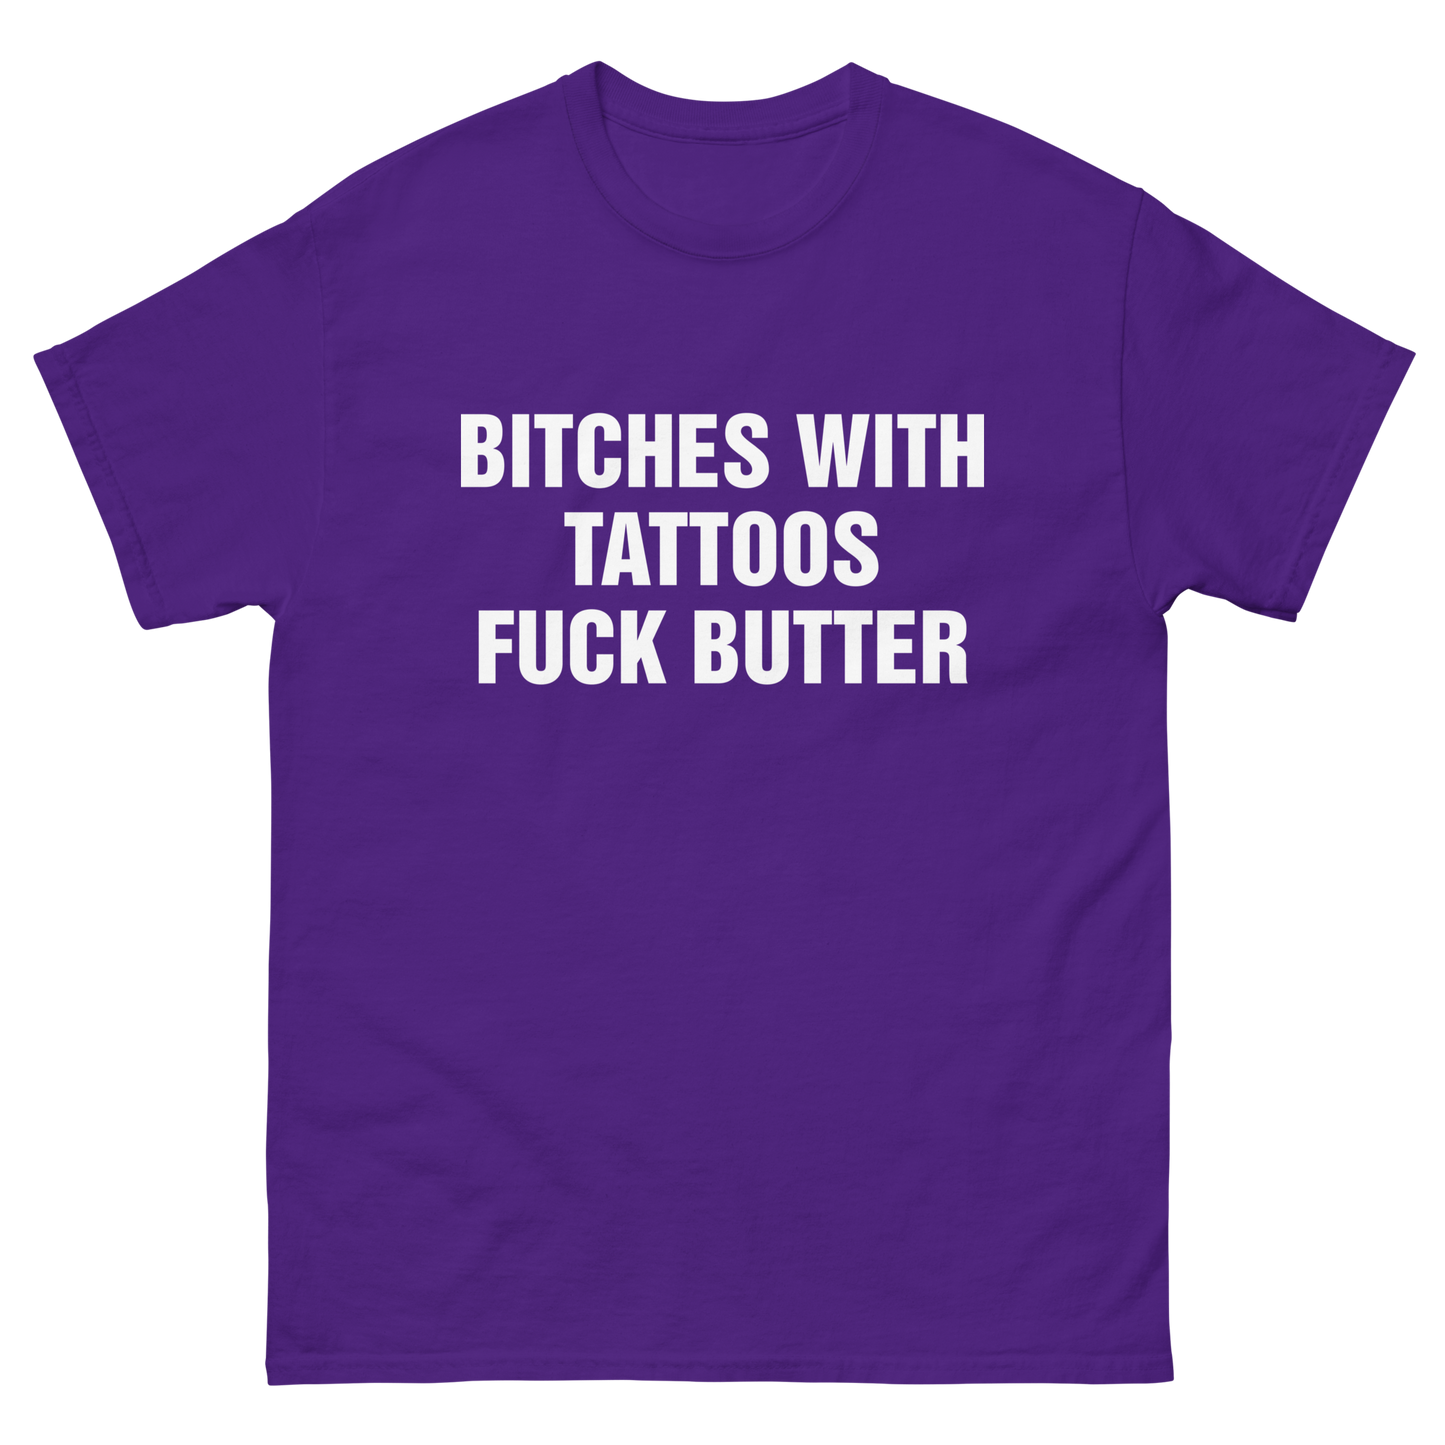 Bitches With Tattoos Fuck Butter.